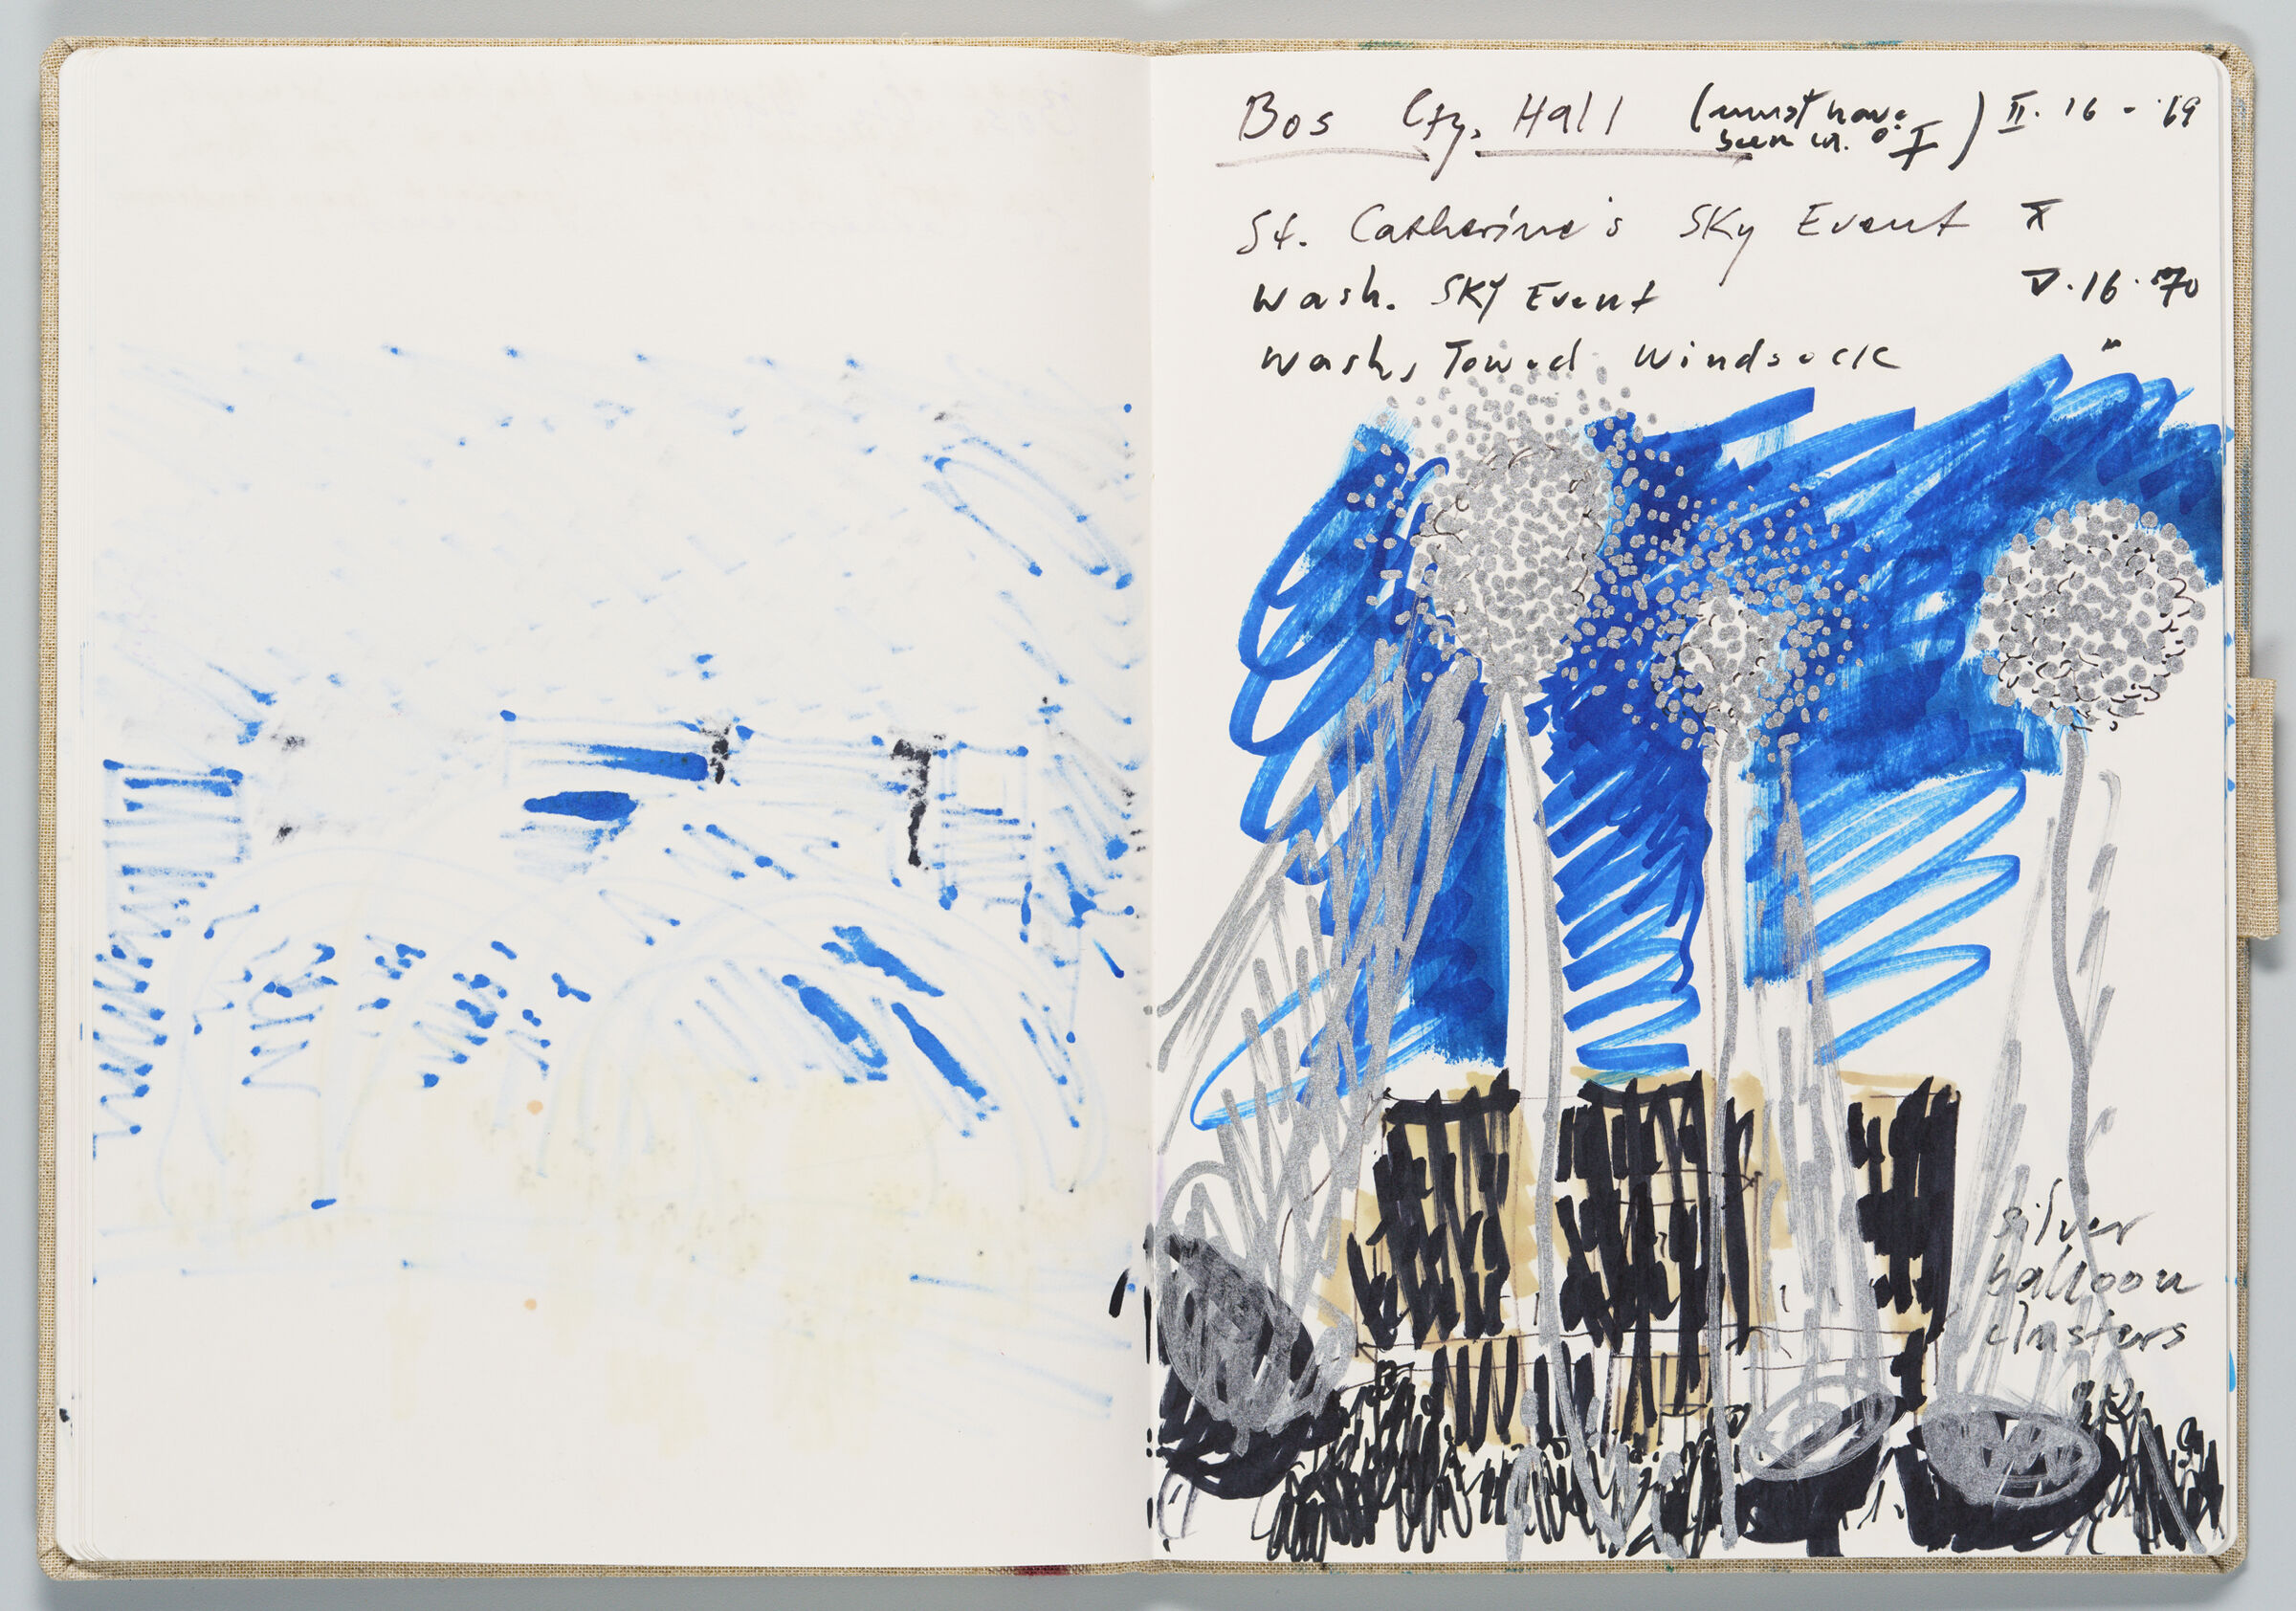 Untitled (Bleed-Through Of Previous Page, Left Page); Untitled (Sketch Of Past Sky Event, Right Page)